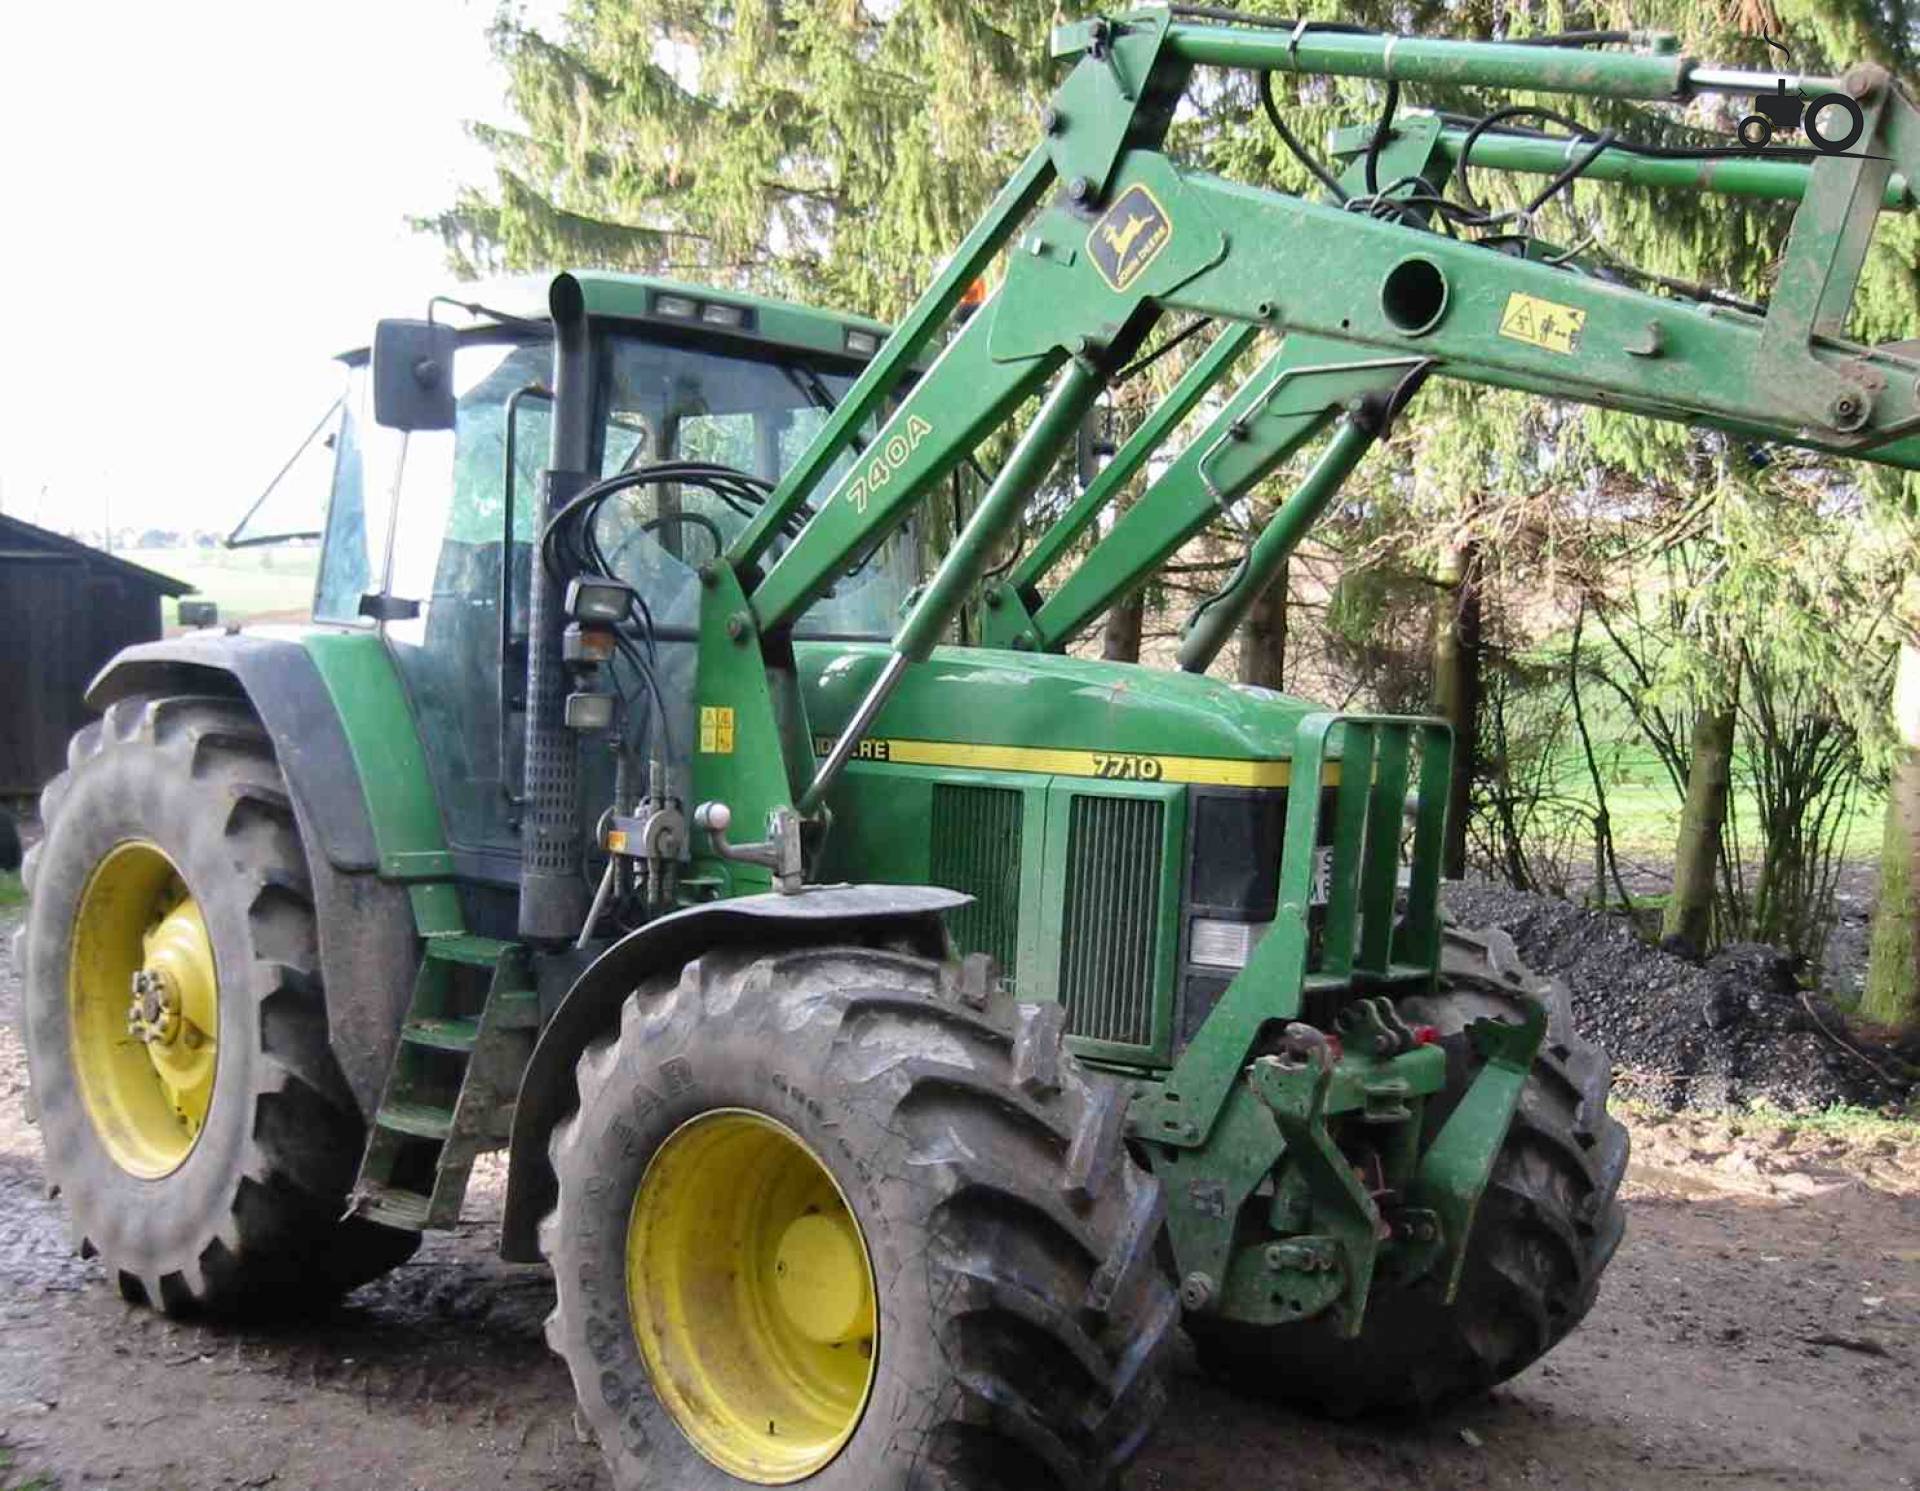 6240 John Deere submited images.